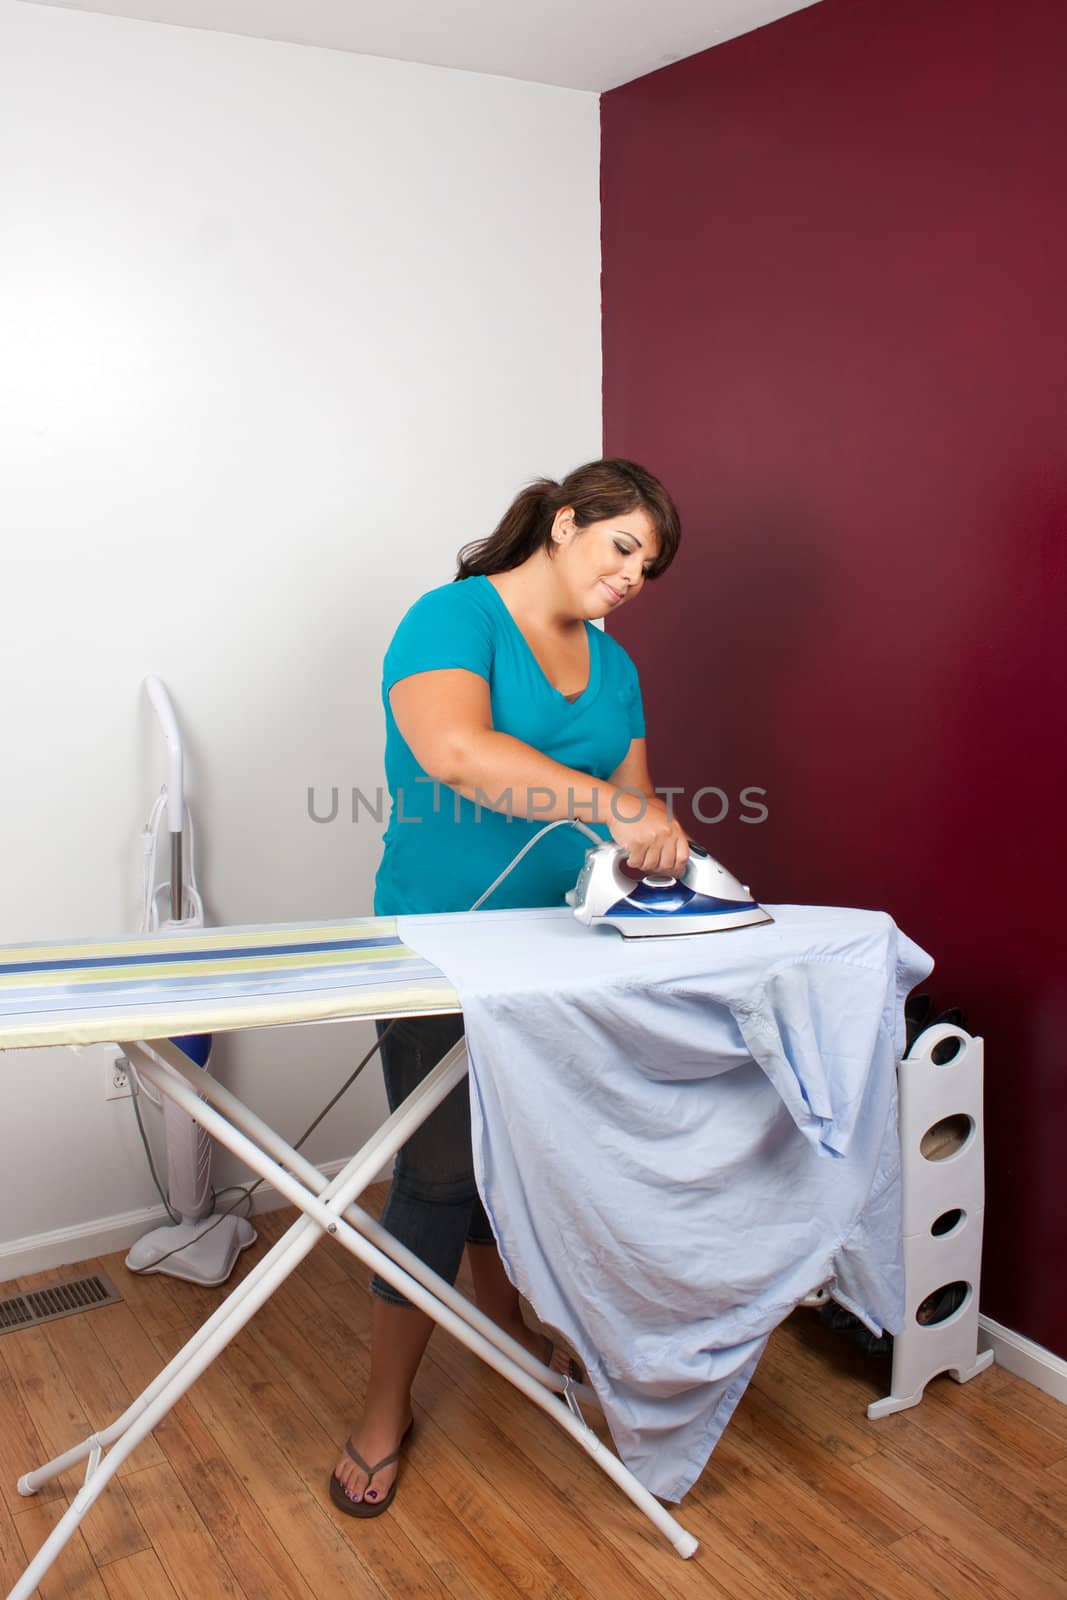 A young woman at home pressing some clothes on an ironing board.